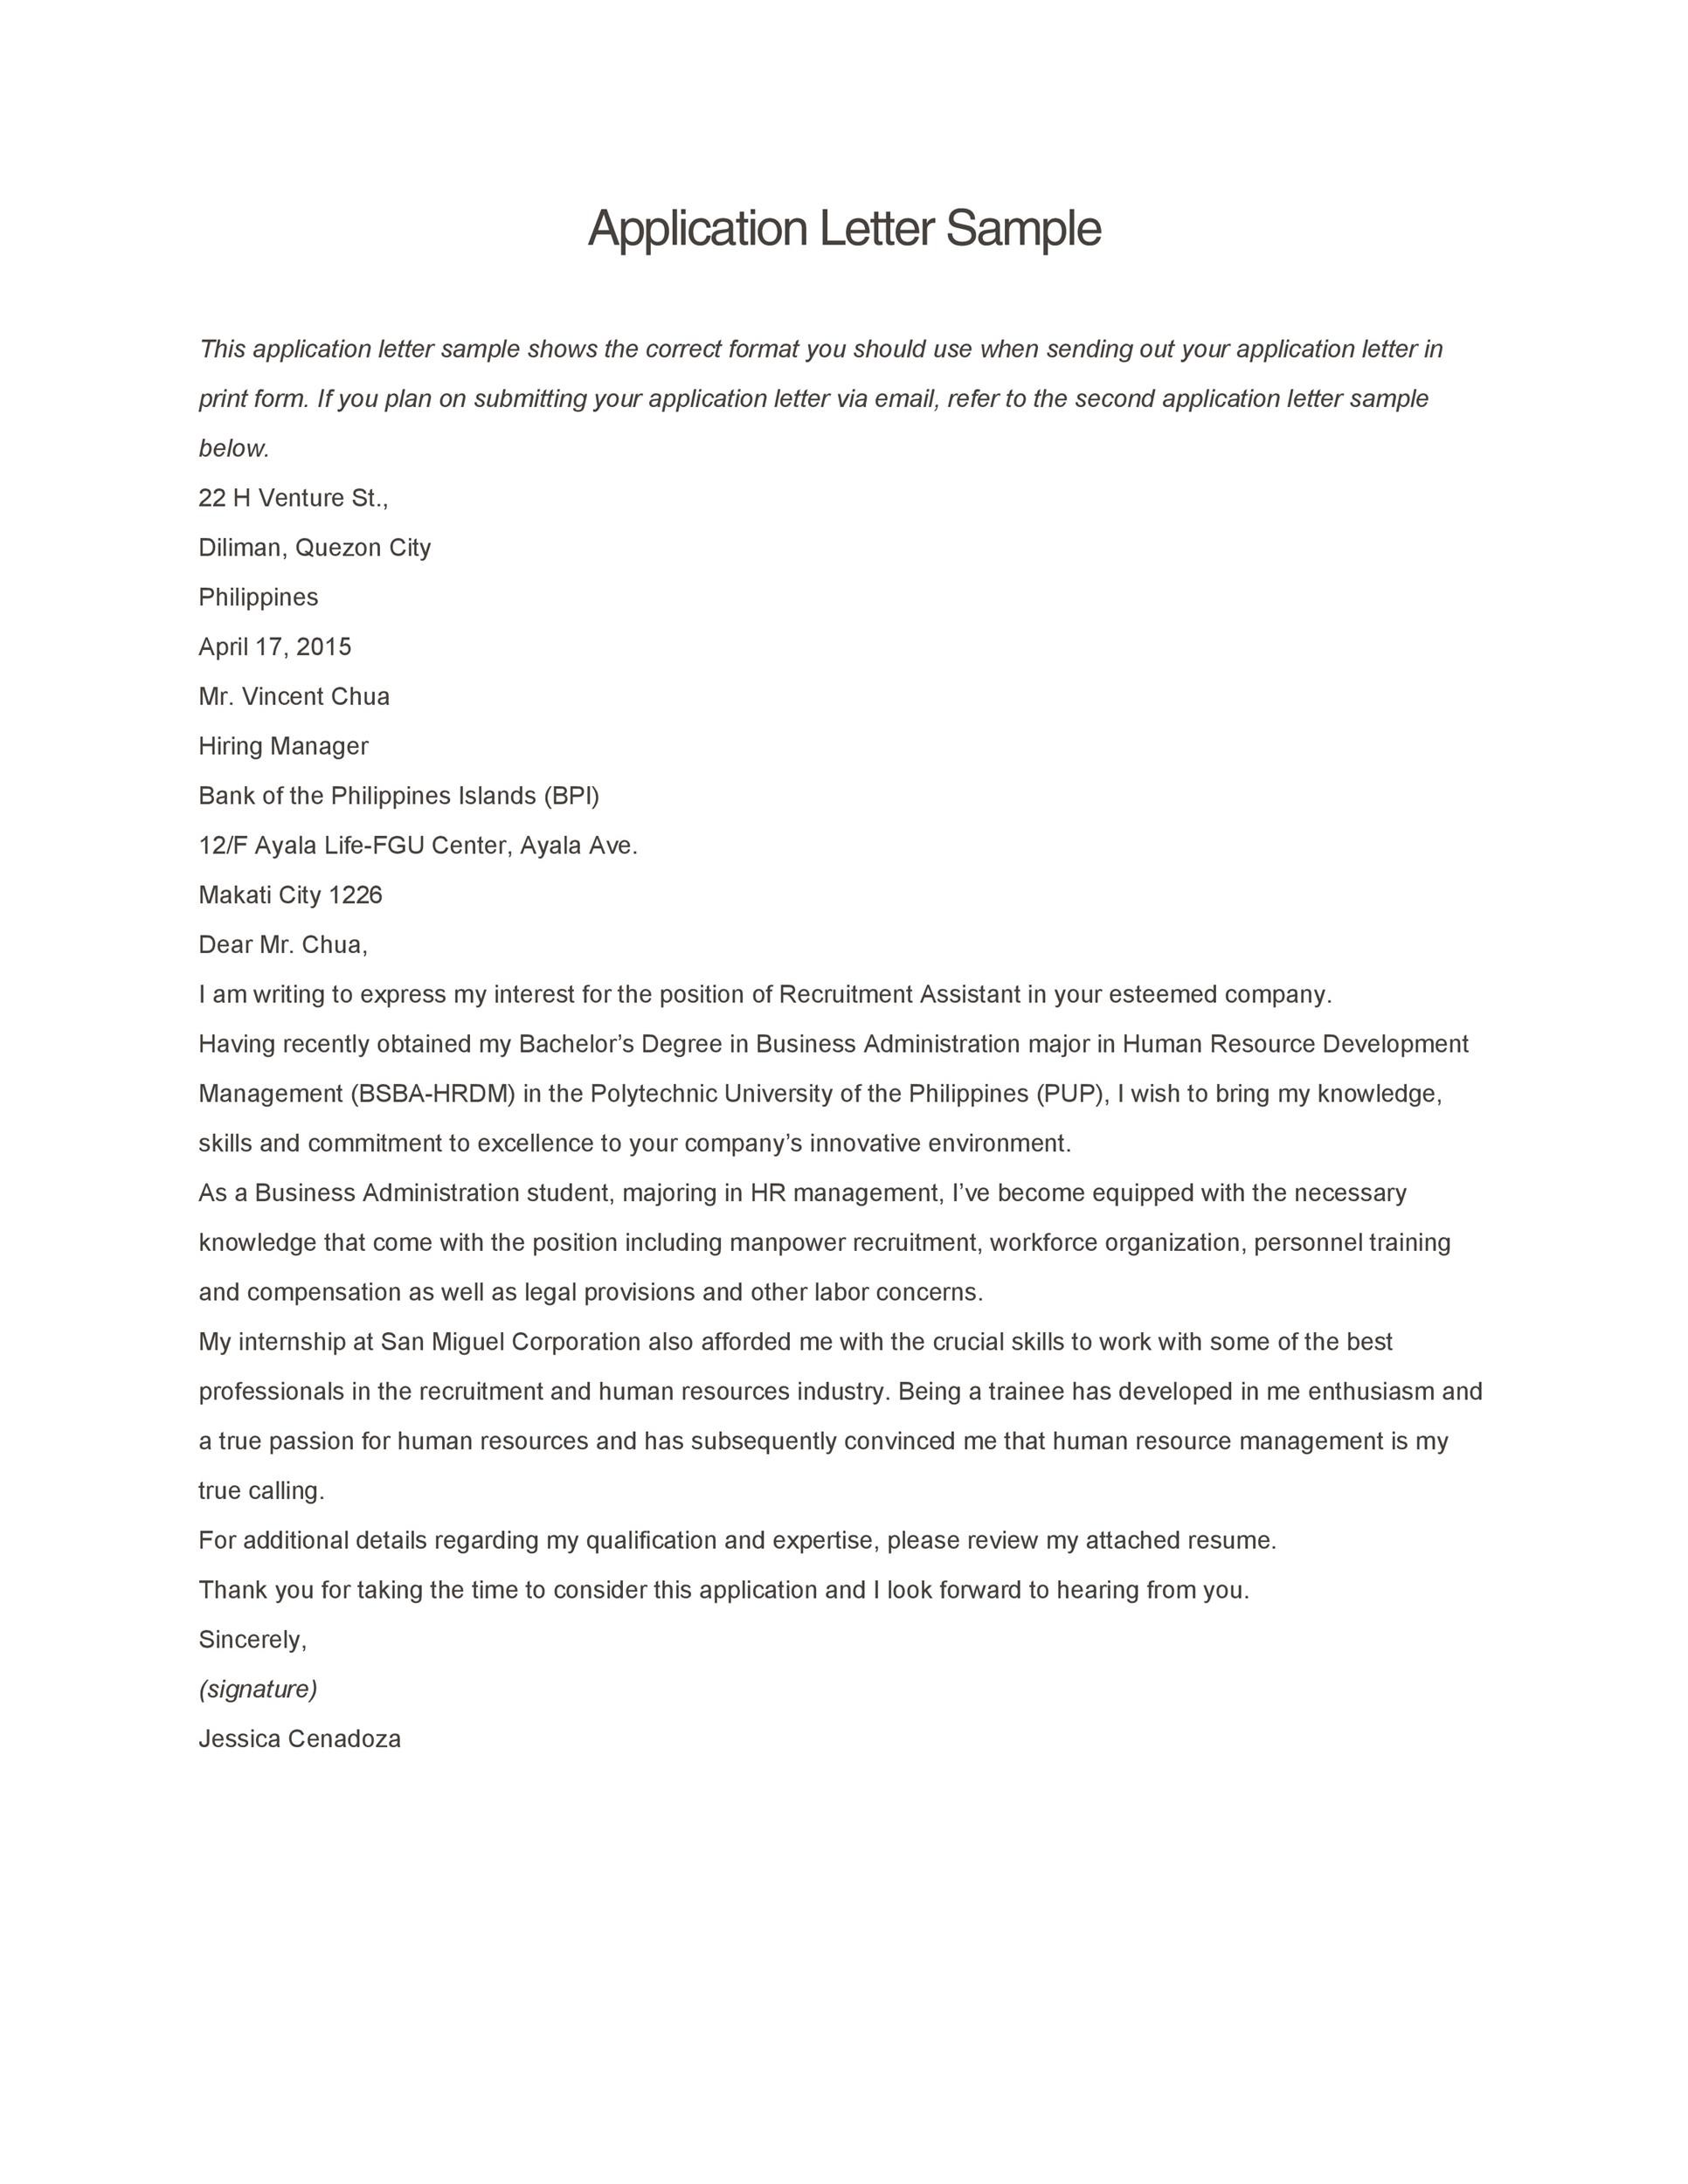 49 Best Letter Of Application Samples How To Write Guide Á